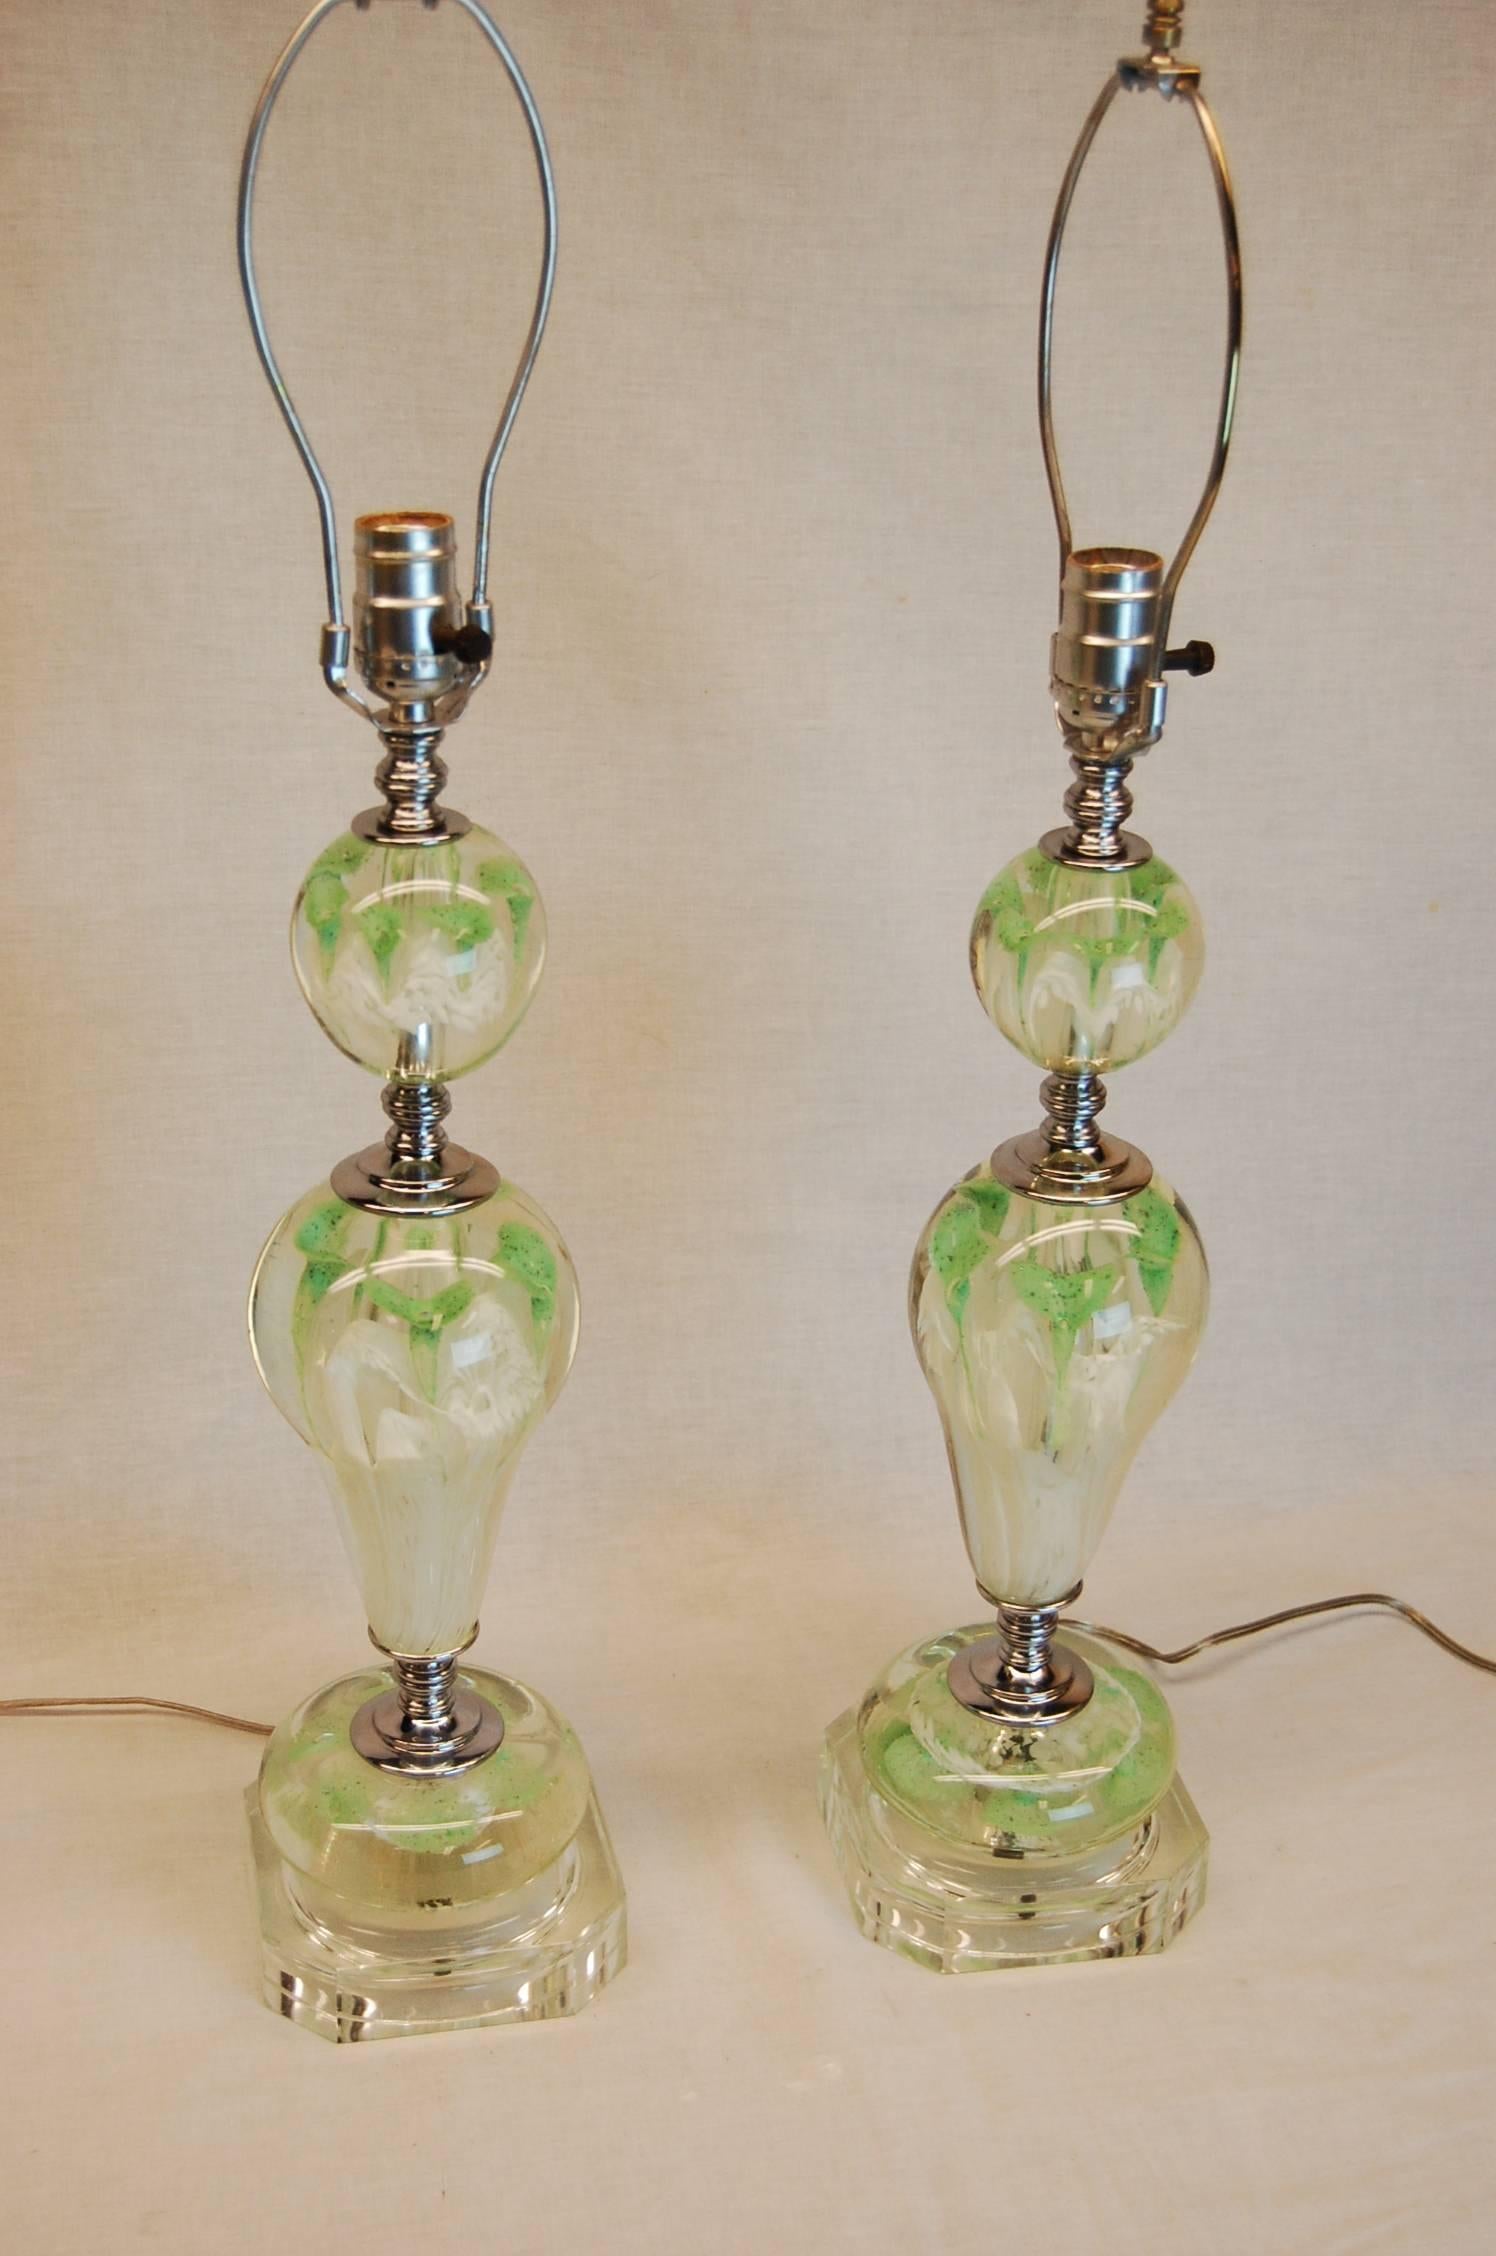 American Pair of Art Deco Lamps with Art Glass Floral Balls & Custom Silk Lampshades For Sale